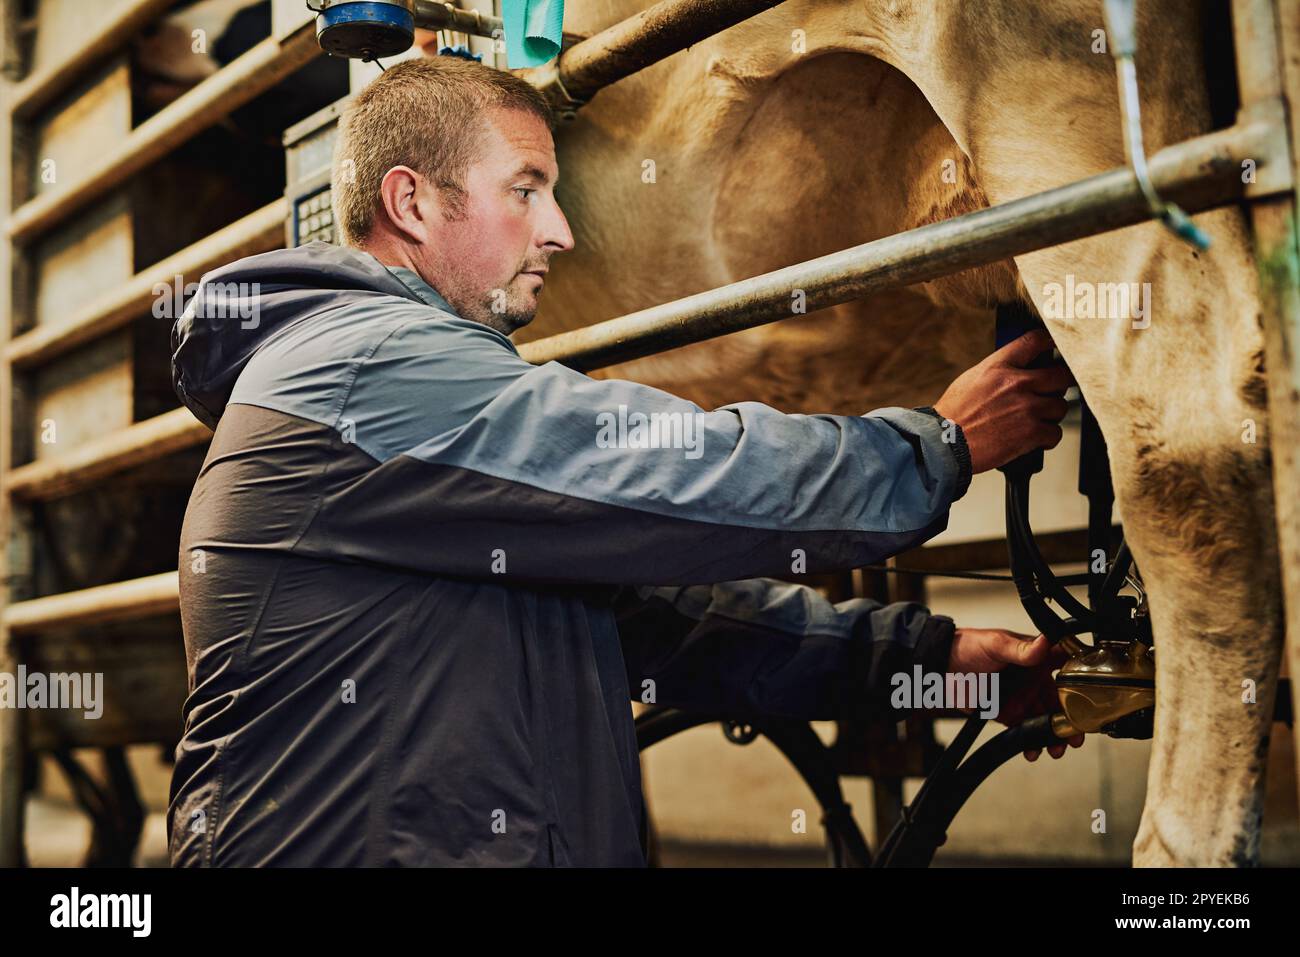 Overseeing the milking process. a male farmer milking cows on a dairy farm. Stock Photo